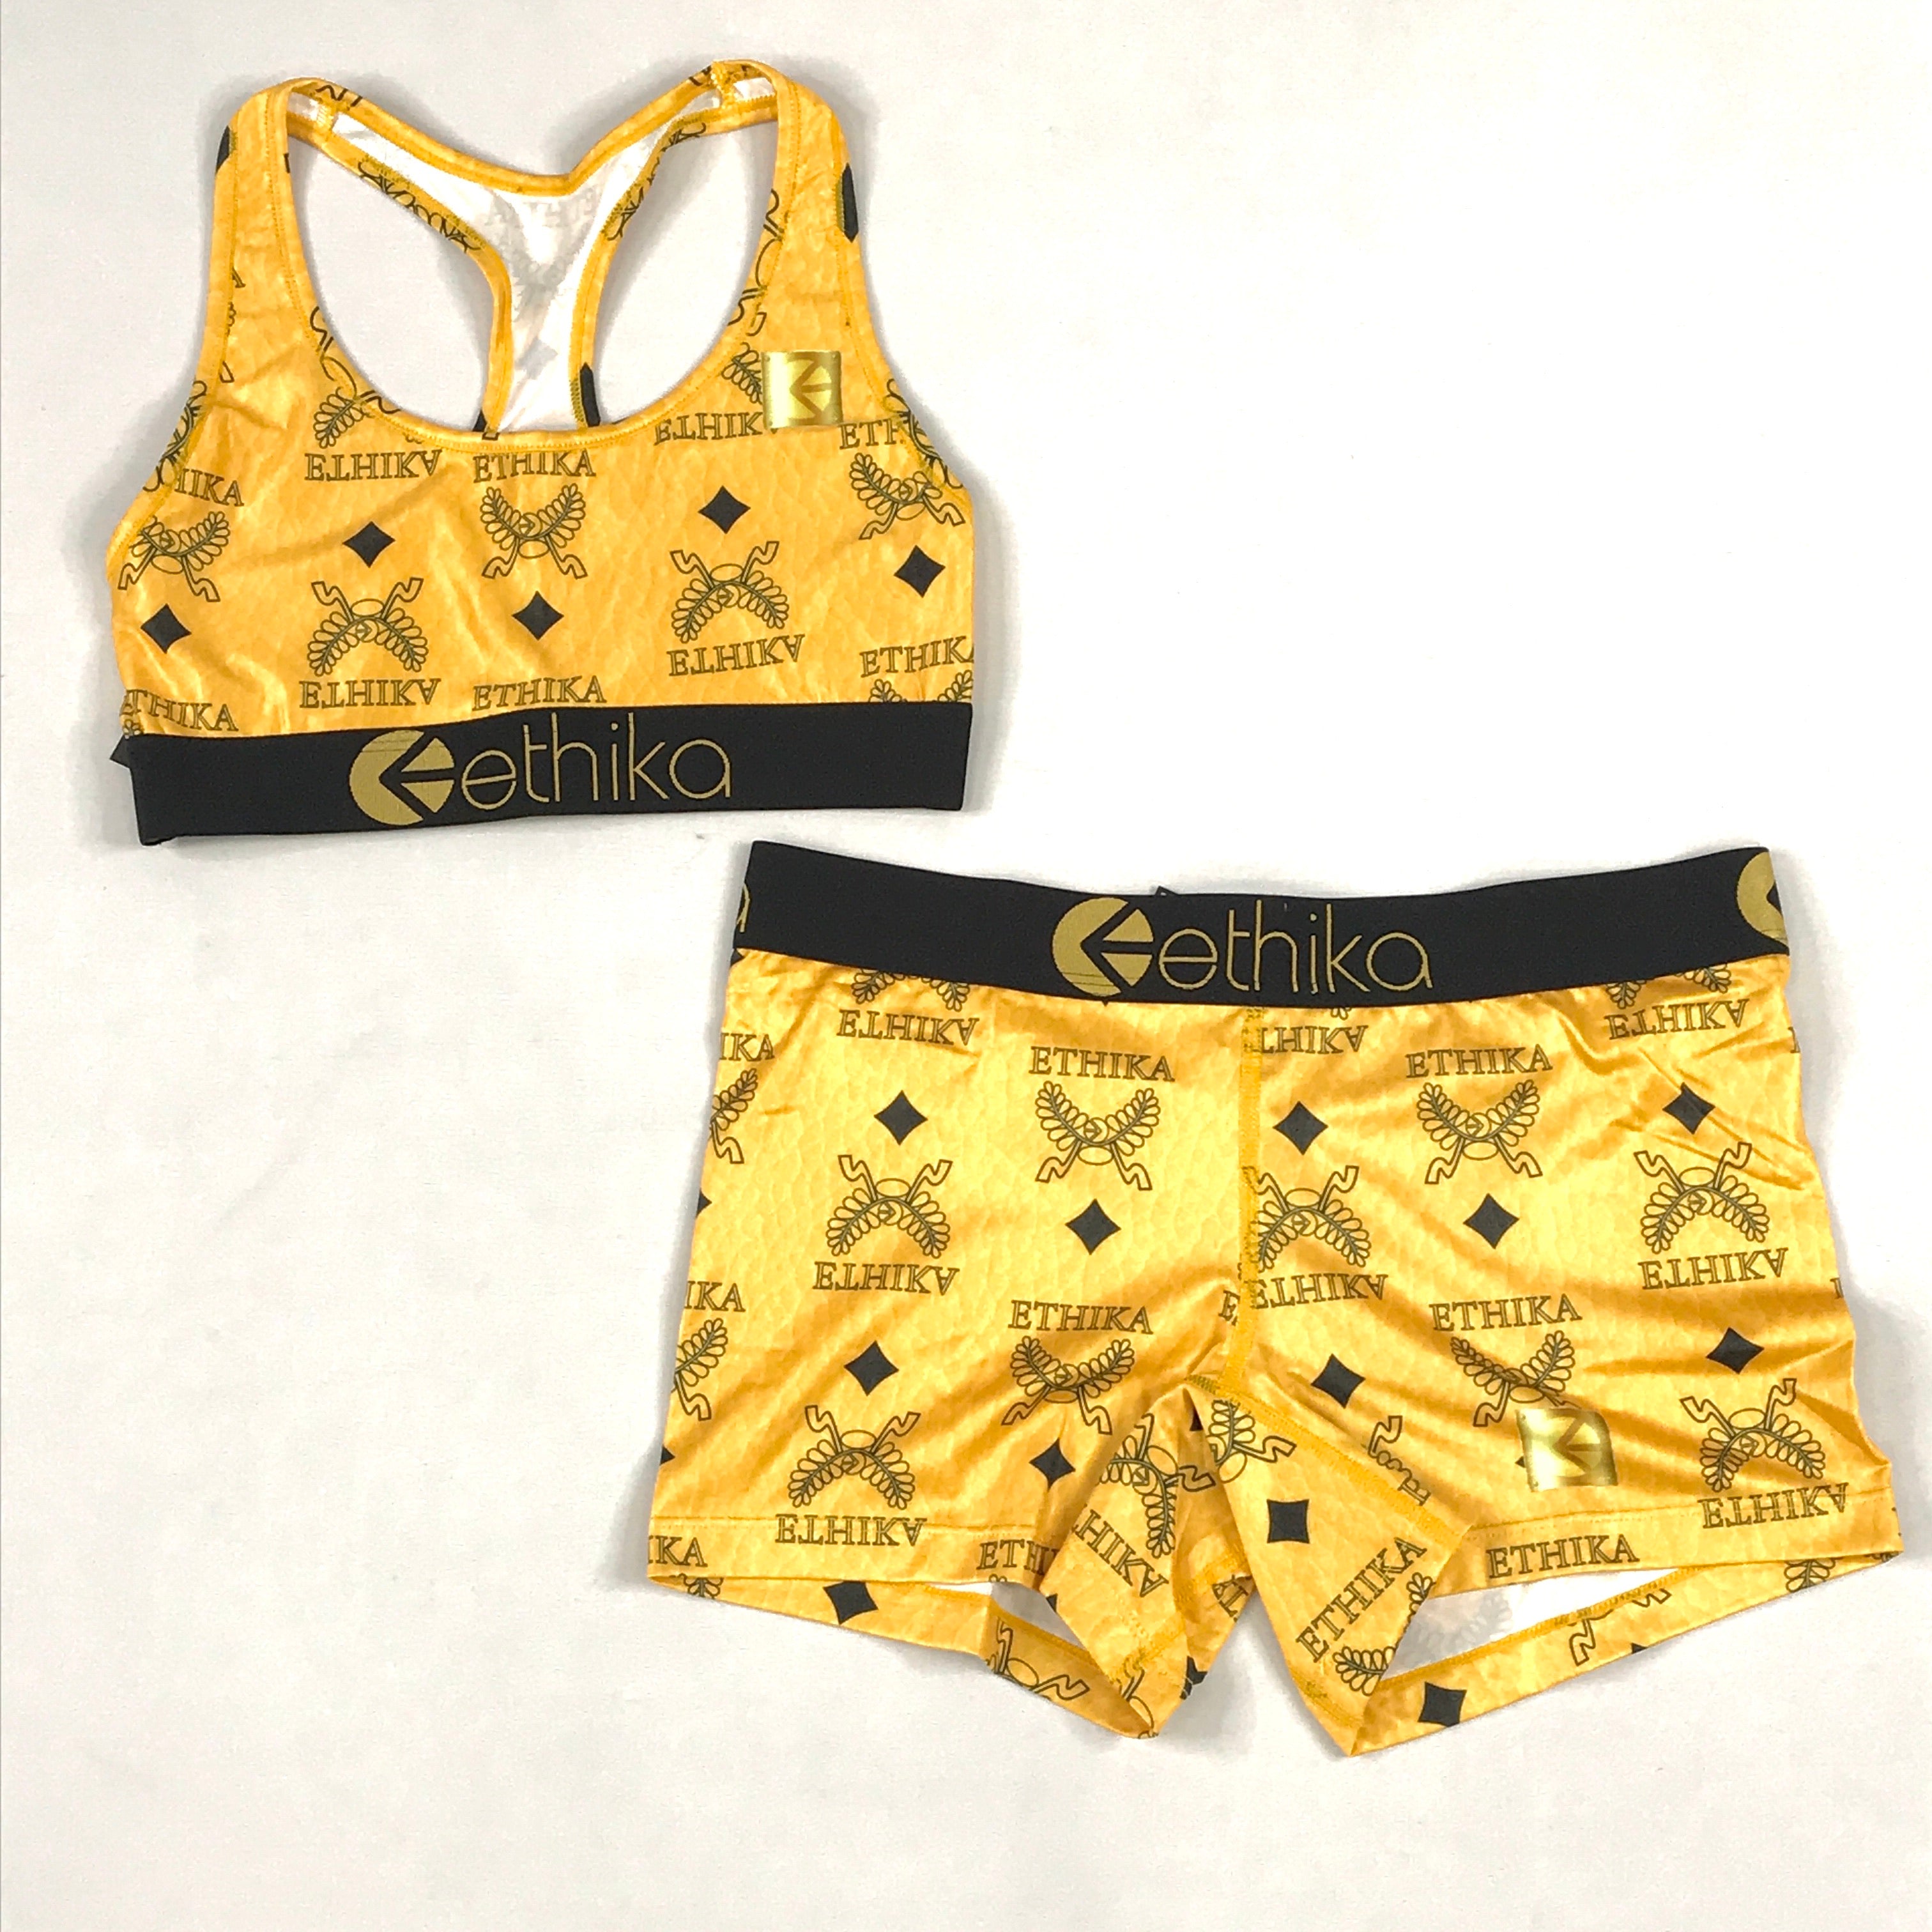 Ethika Staple boxer brief and sports bra set in Sunday Bag (wlsb